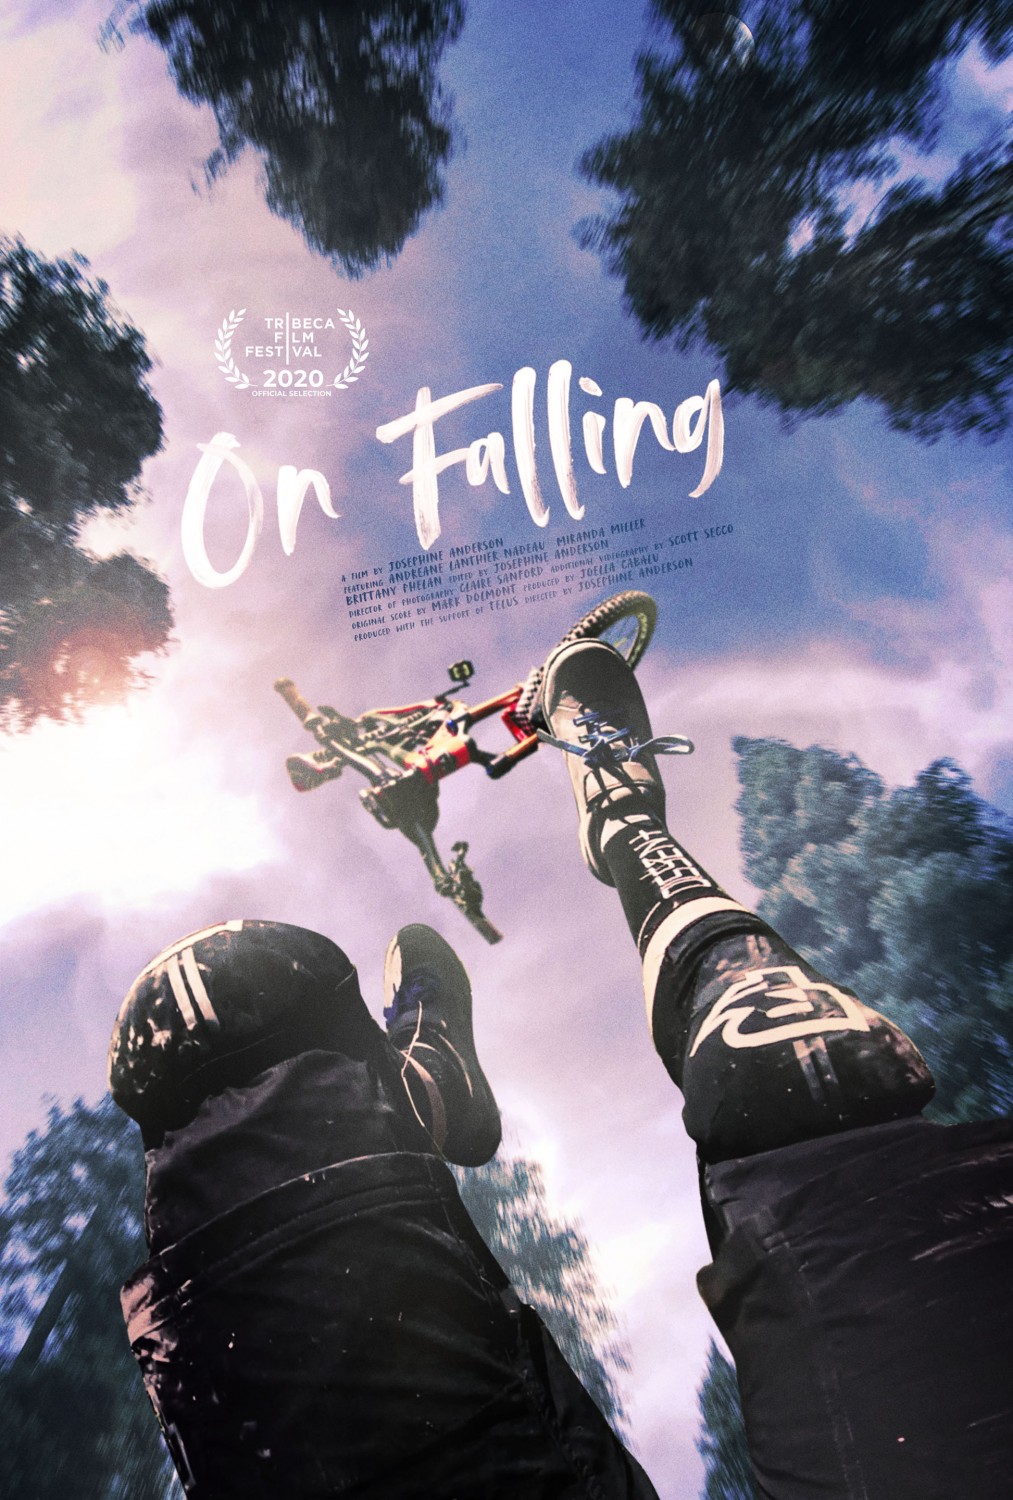 Extra Large Movie Poster Image for On Falling